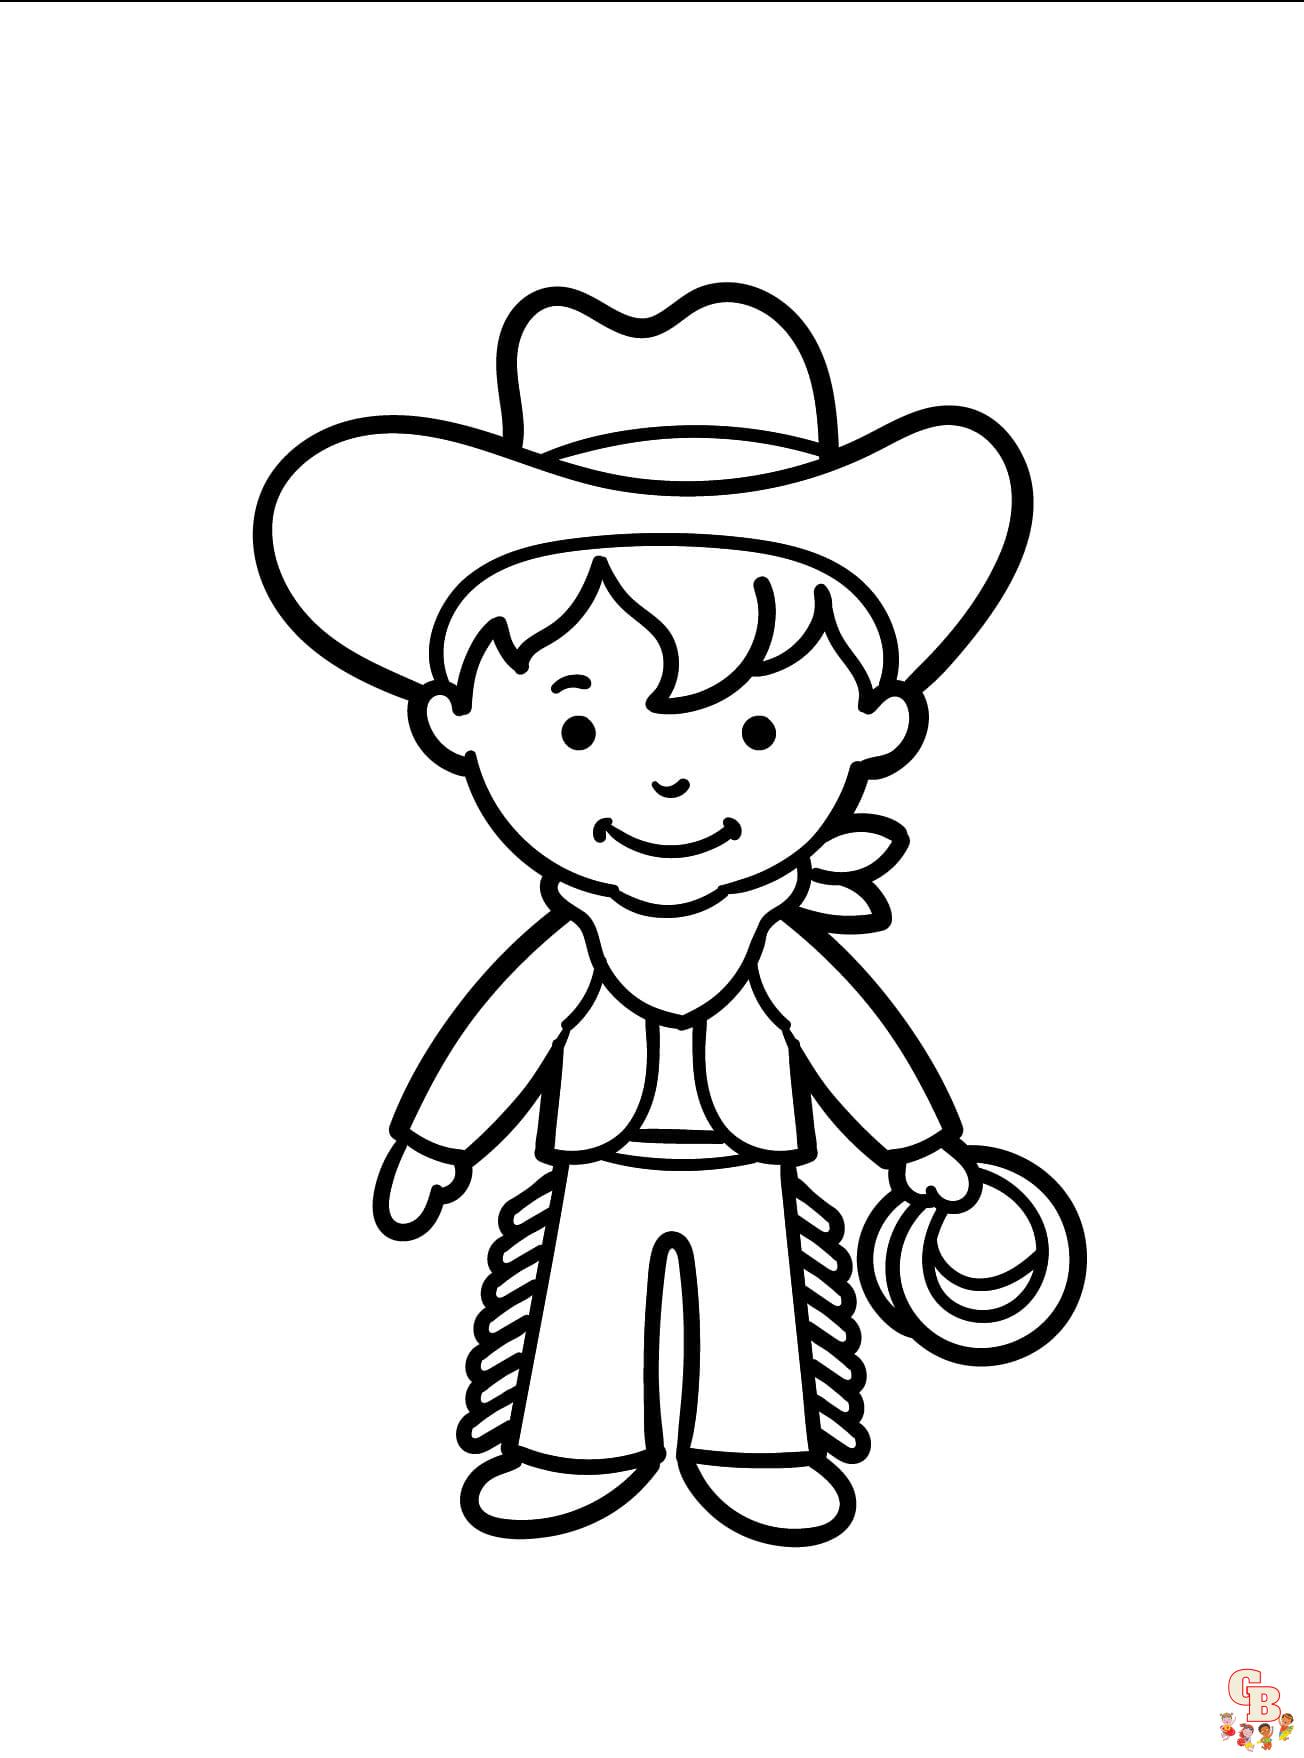 Free Western coloring pages for kids